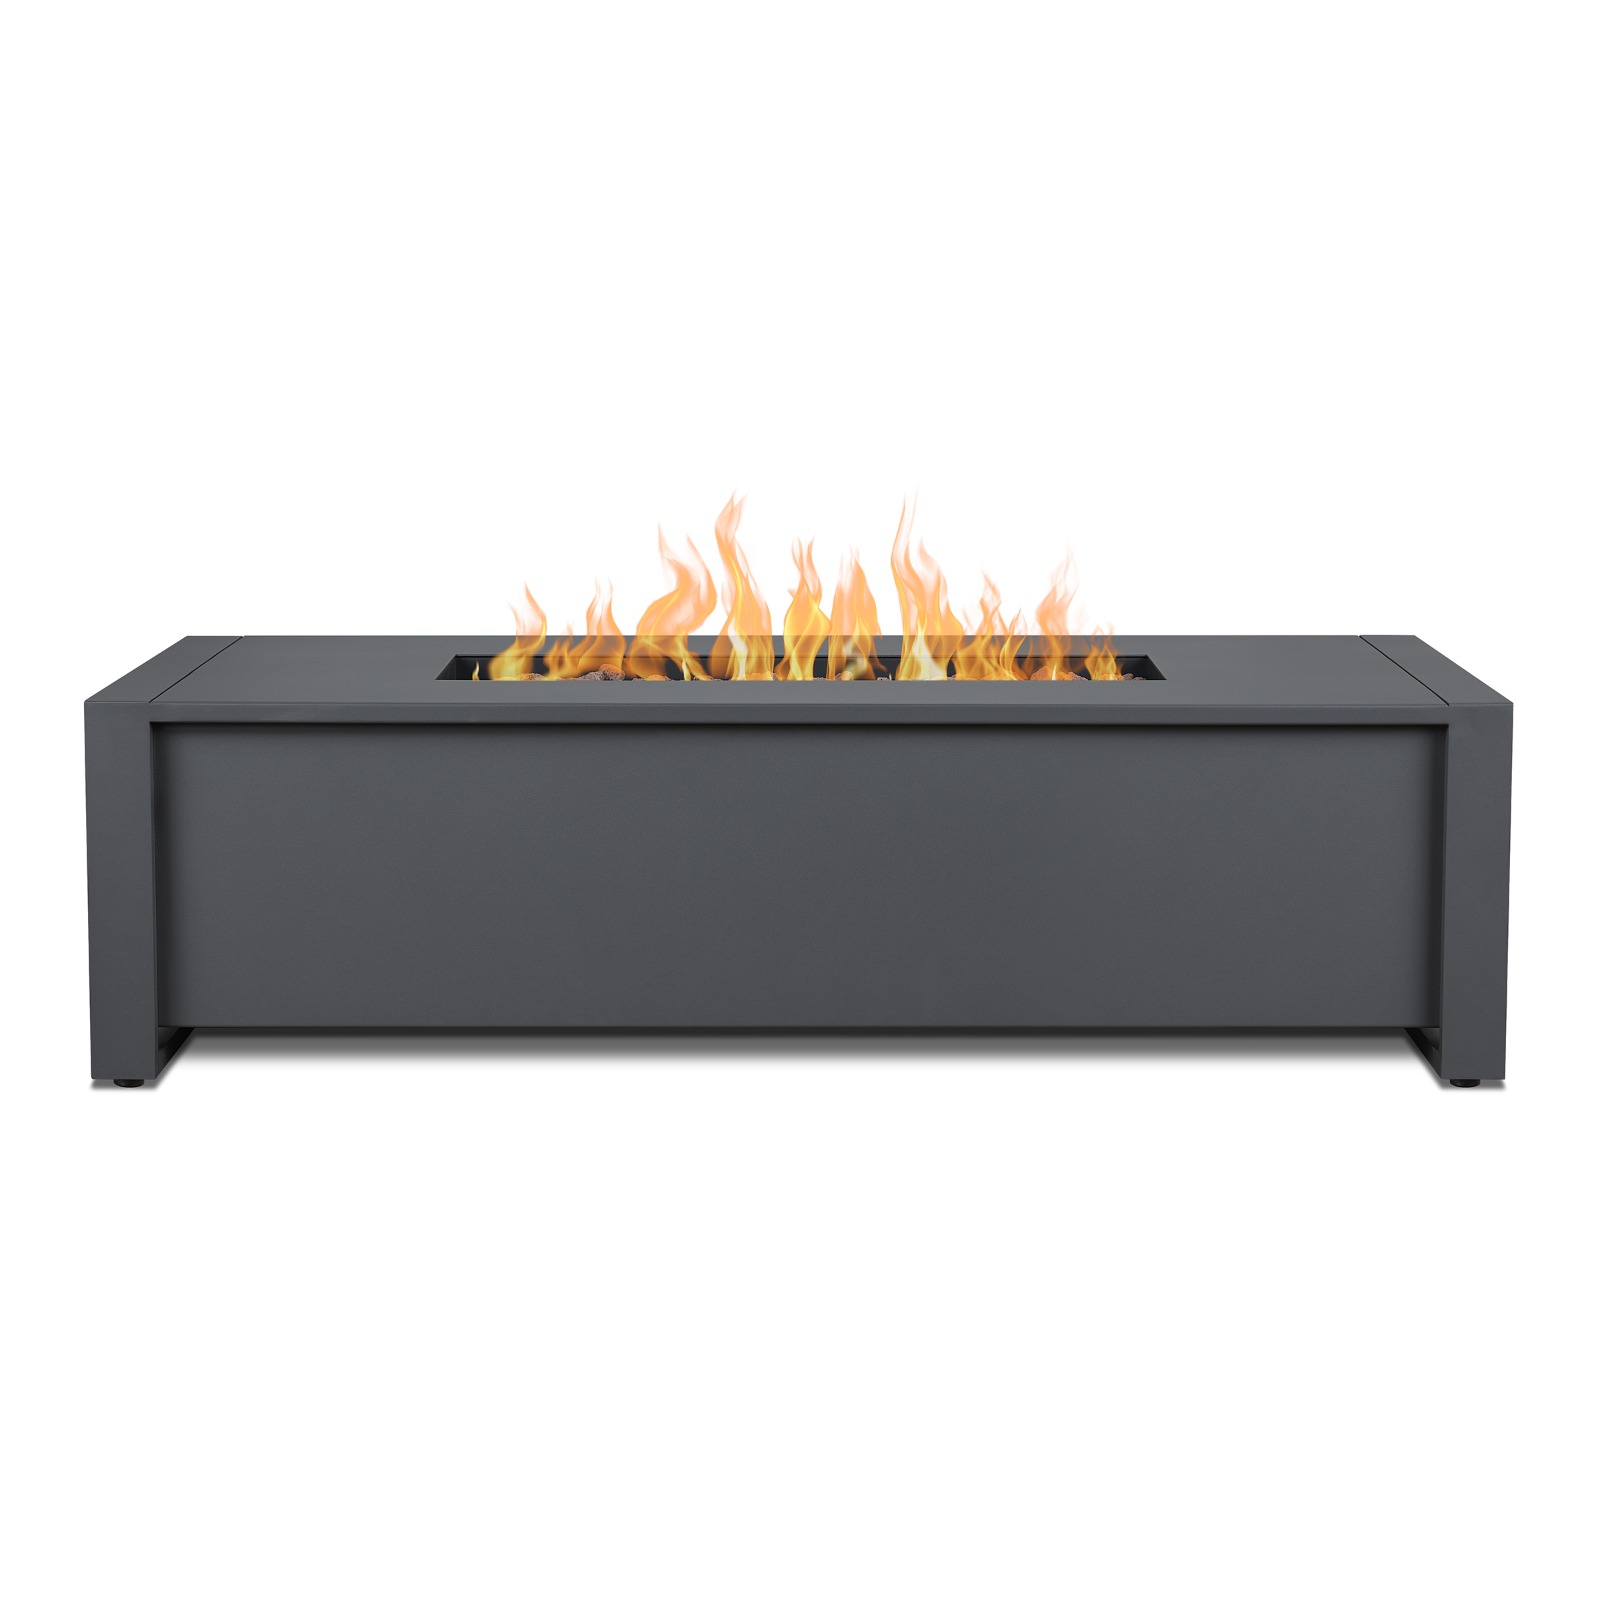 Keenan 52" Propane Fire Pit Fire Bowl Outdoor Fireplace Fire Table for Backyard or Patio